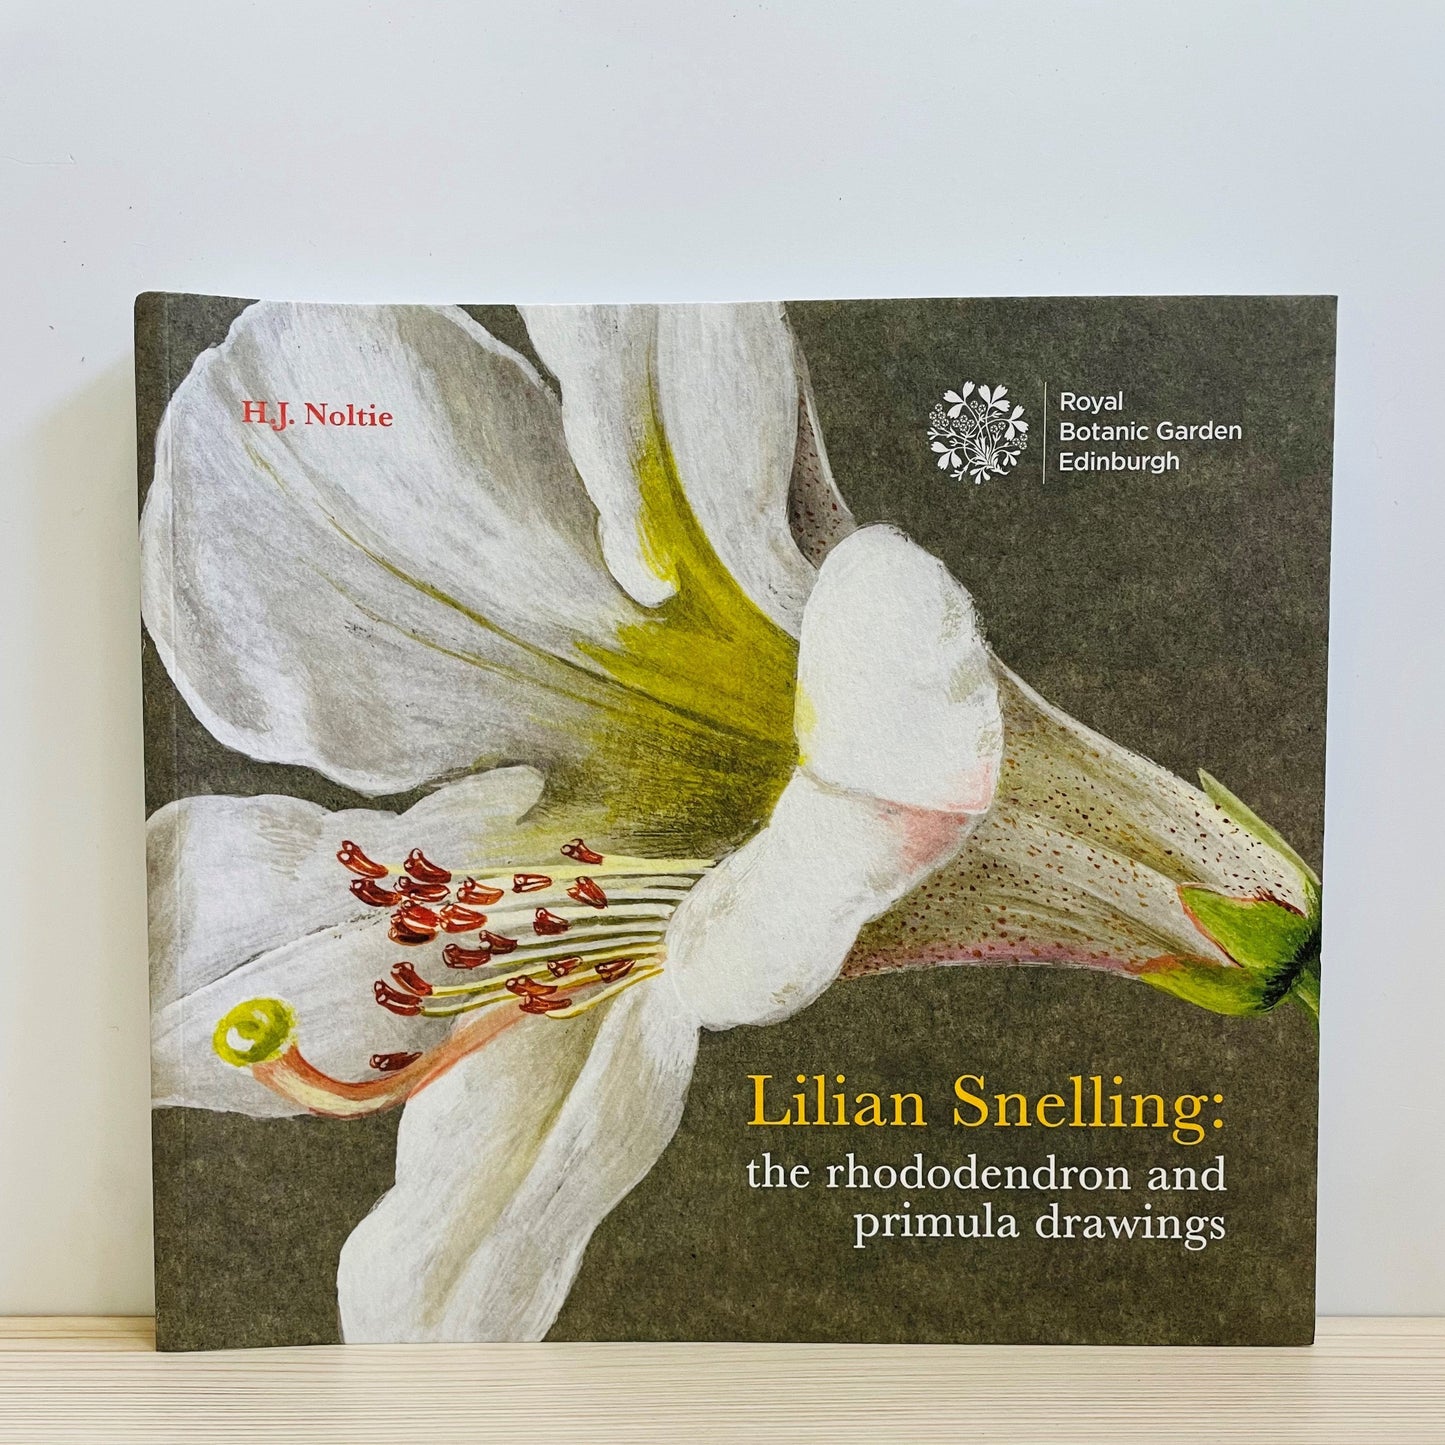 Lillian Snelling: the rhododendron and primula drawings